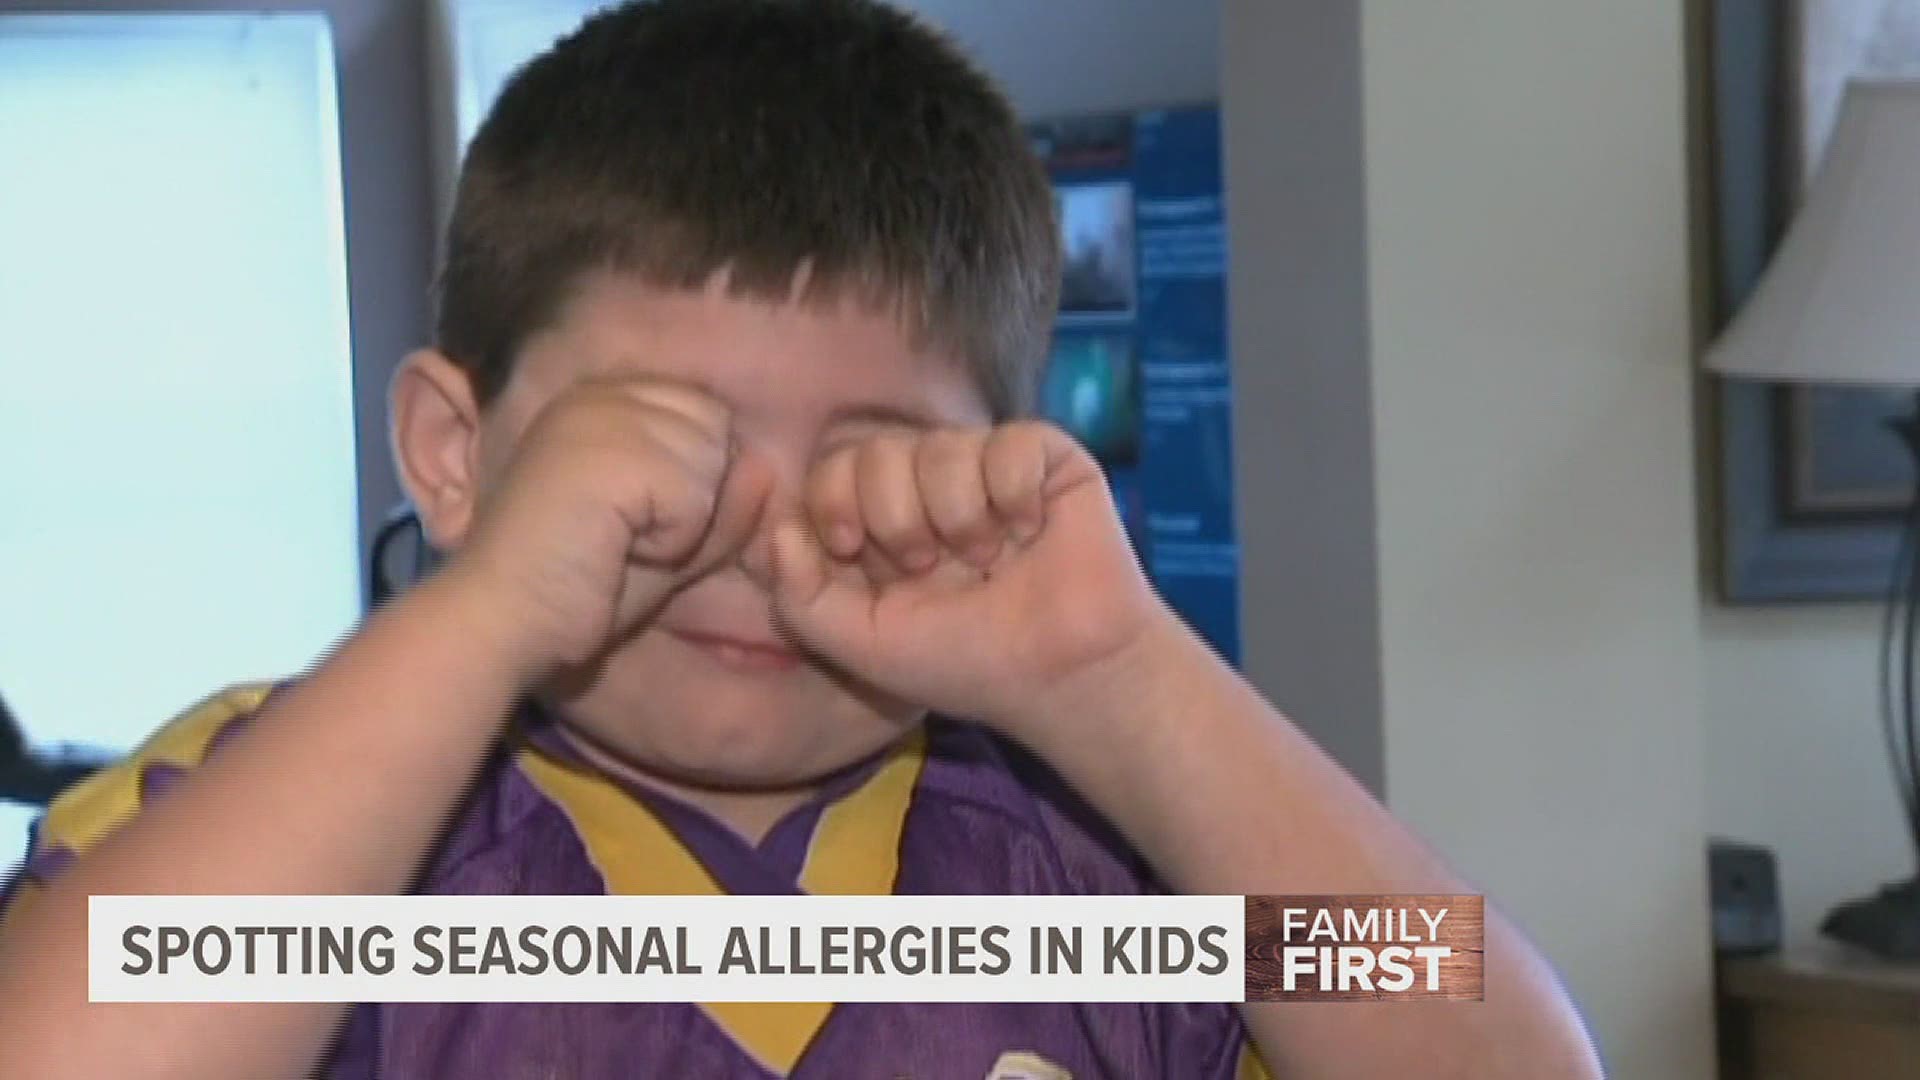 With many similar symptoms, Dr. Alex Horowitz from Penn State Children's Hospital explains how parents can tell the difference between allergies and a cold.